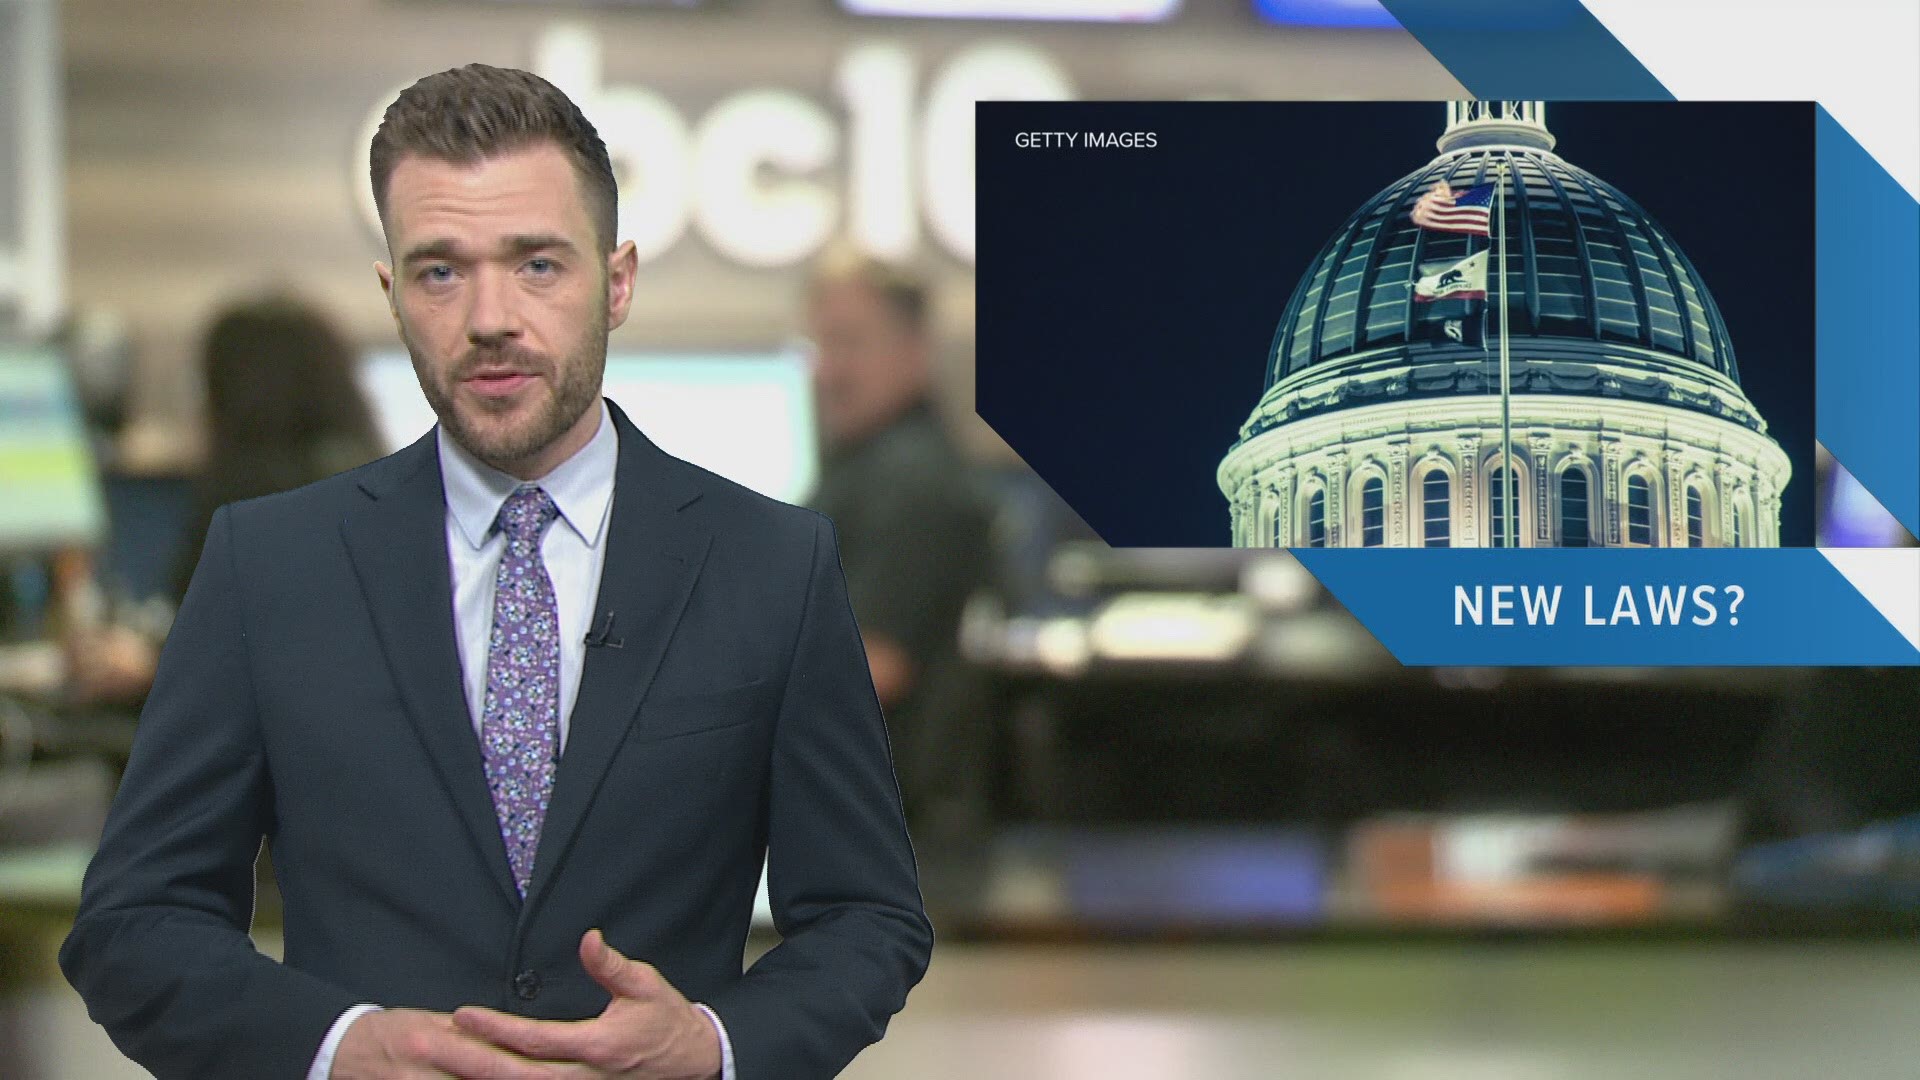 Evening Headlines: September 15, 2019 | Catch in-depth reporting on #LateNewsTonight at 11 p.m. | The latest Sacramento news is always at www.abc10.com